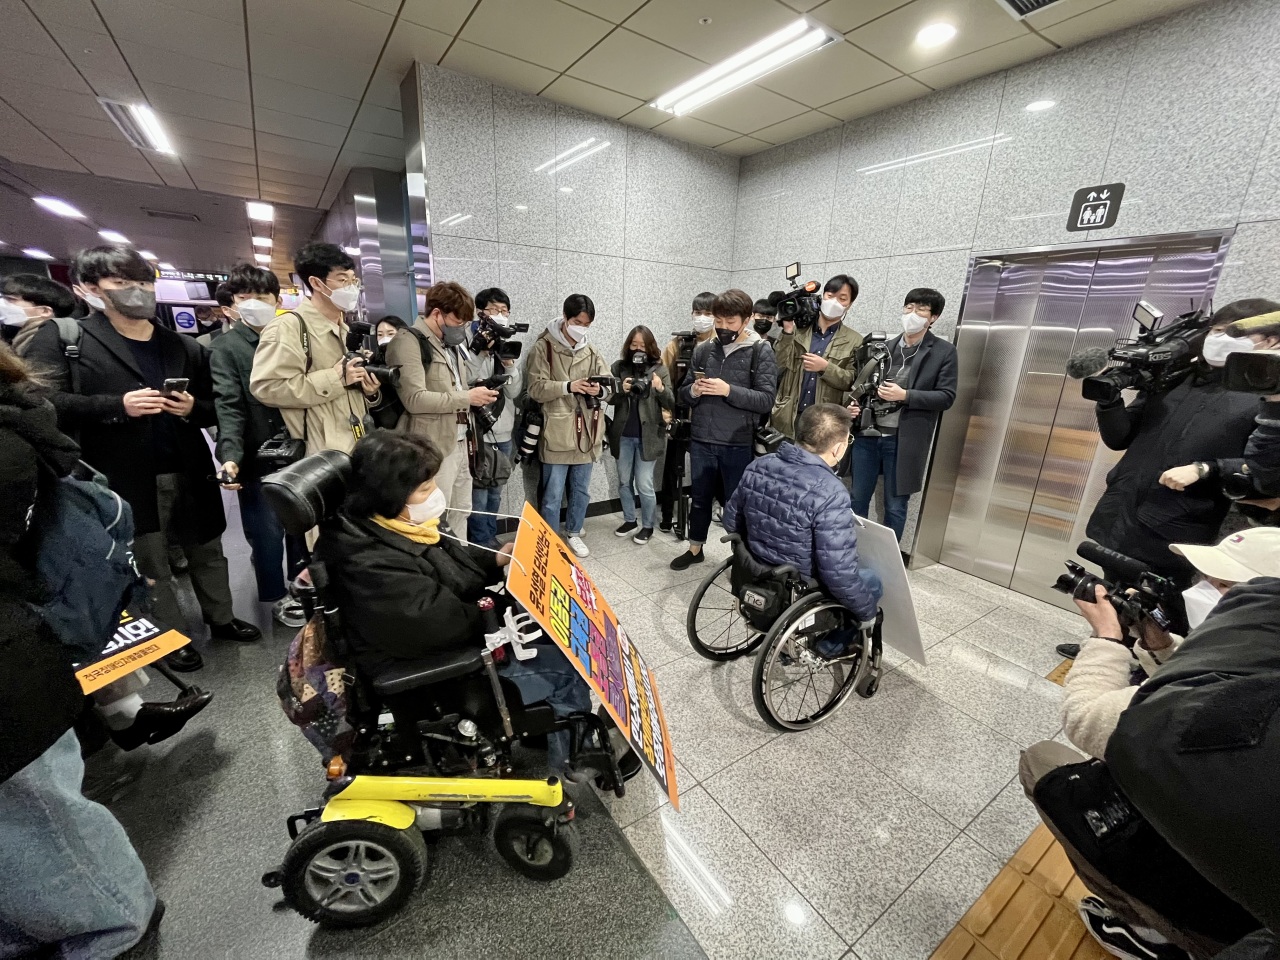 Protesters using wheelchairs wait in line for an elevator inside a subway station on Monday. (Kim Arin/The Korea Herald)